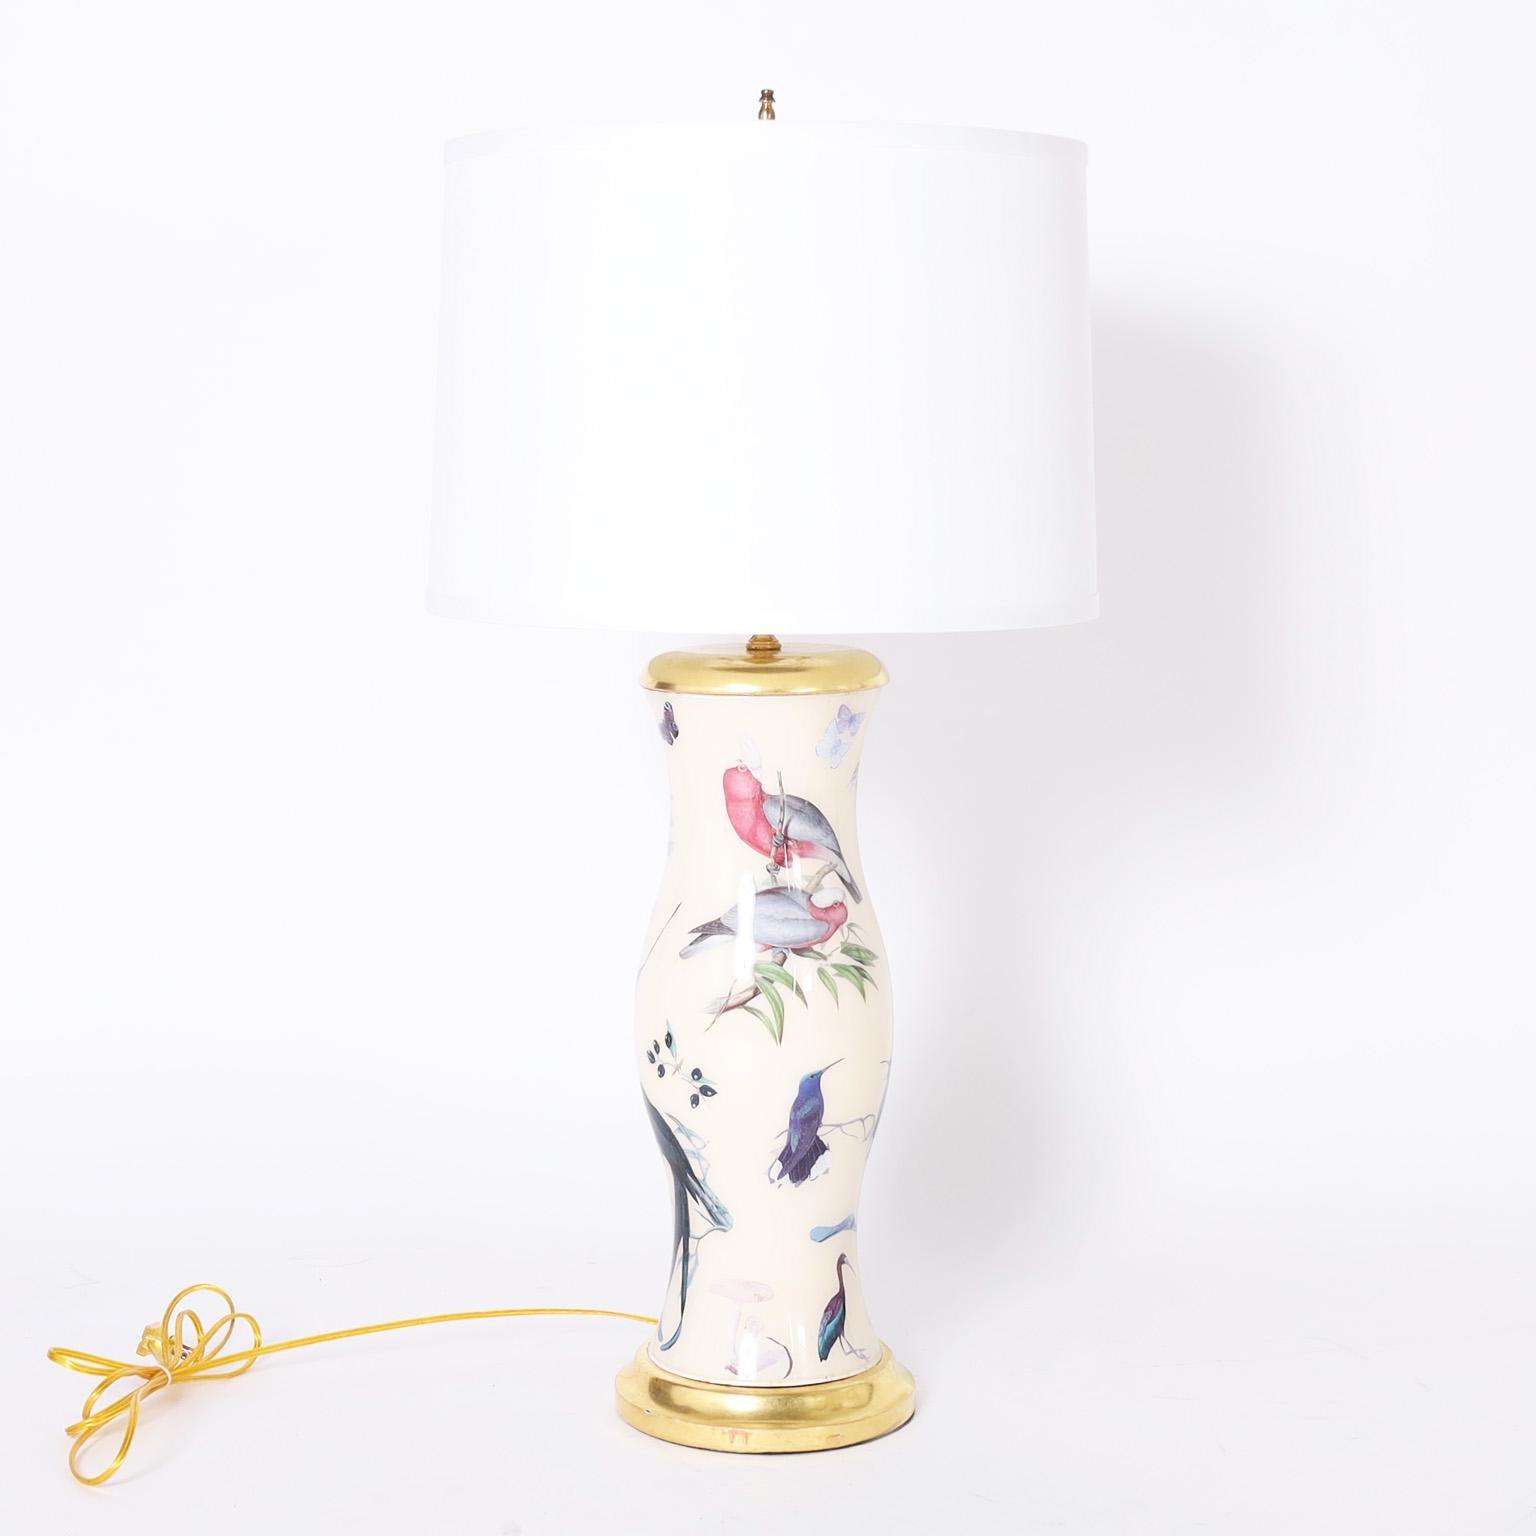 Standout pair of table lamps crafted in glass in a classic form featuring a reverse decoupage technique with birds, bugs and berries presented in brass hardware.